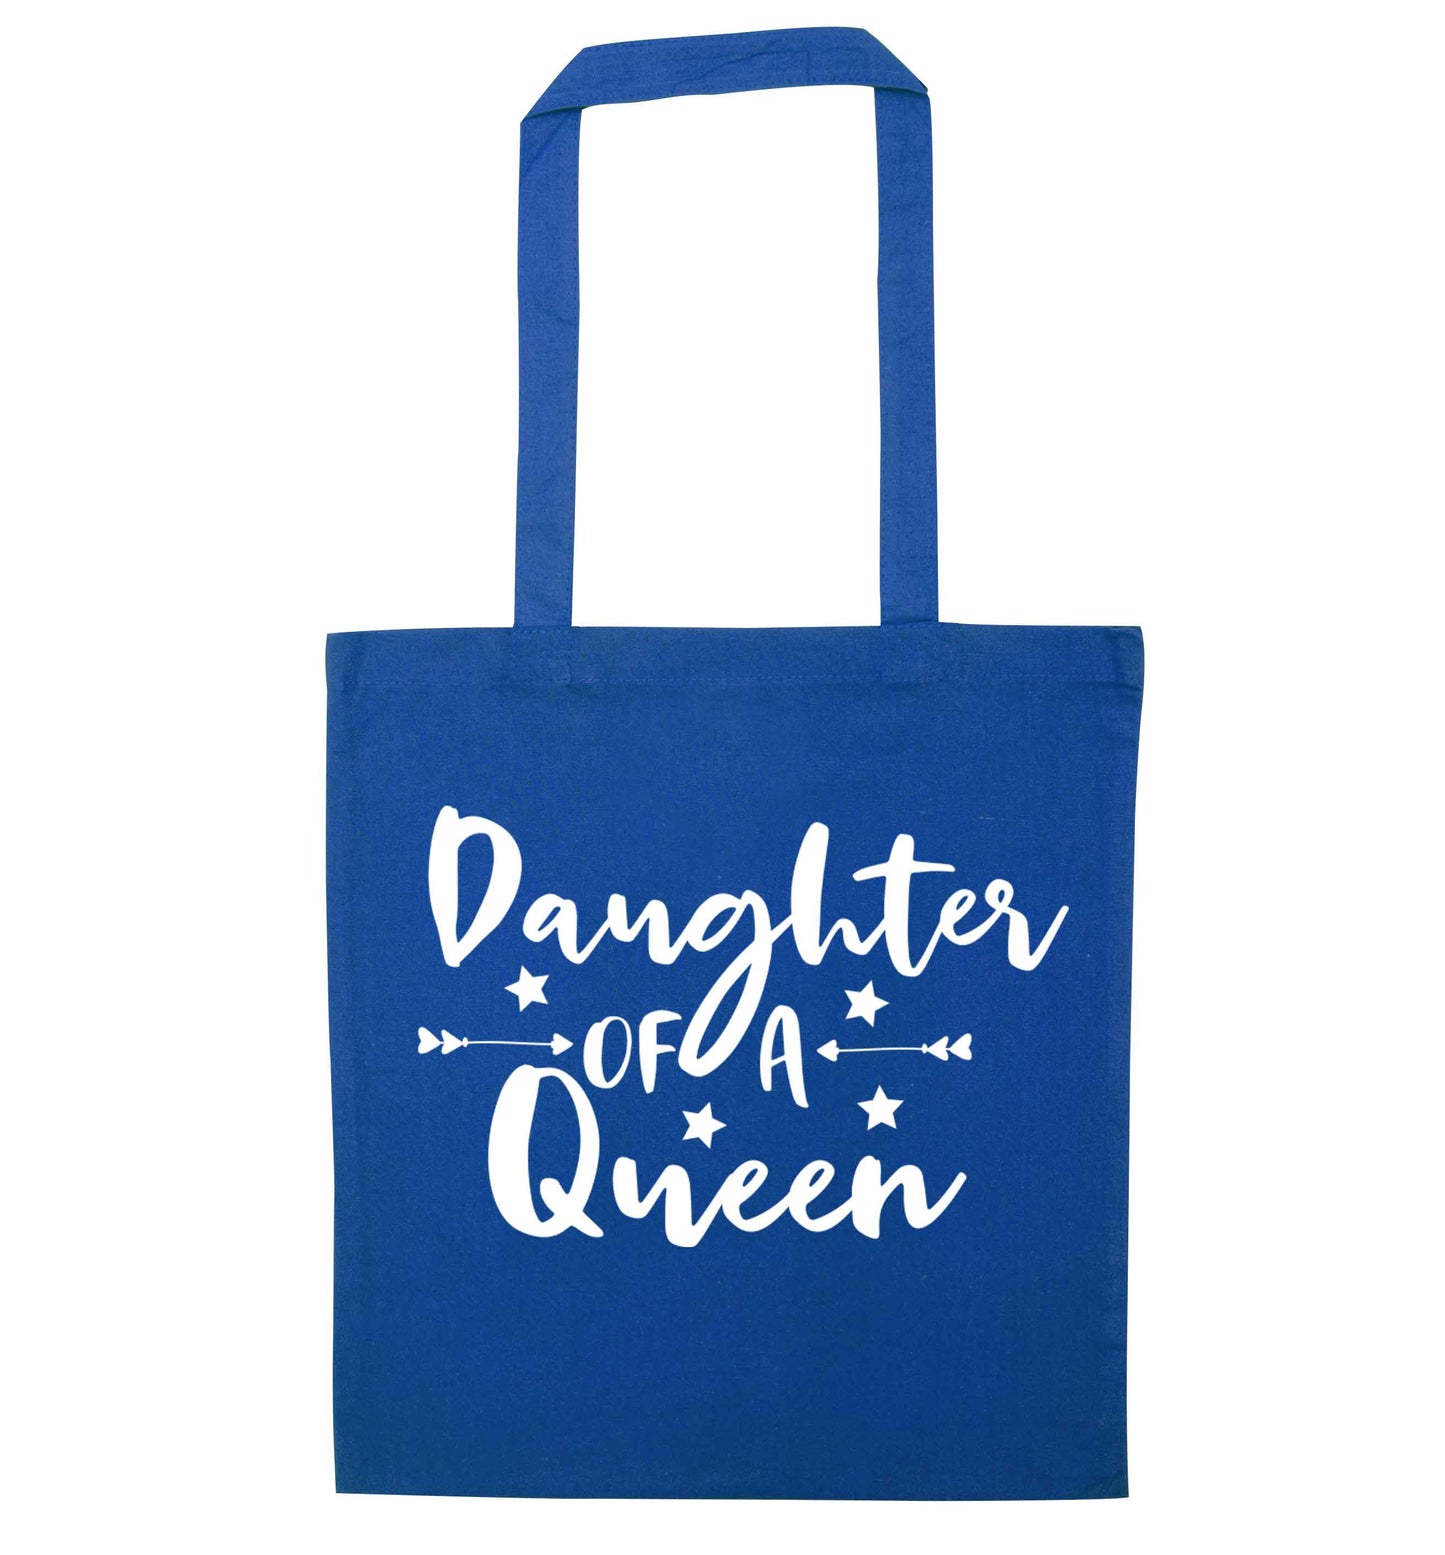 Daughter of a Queen blue tote bag